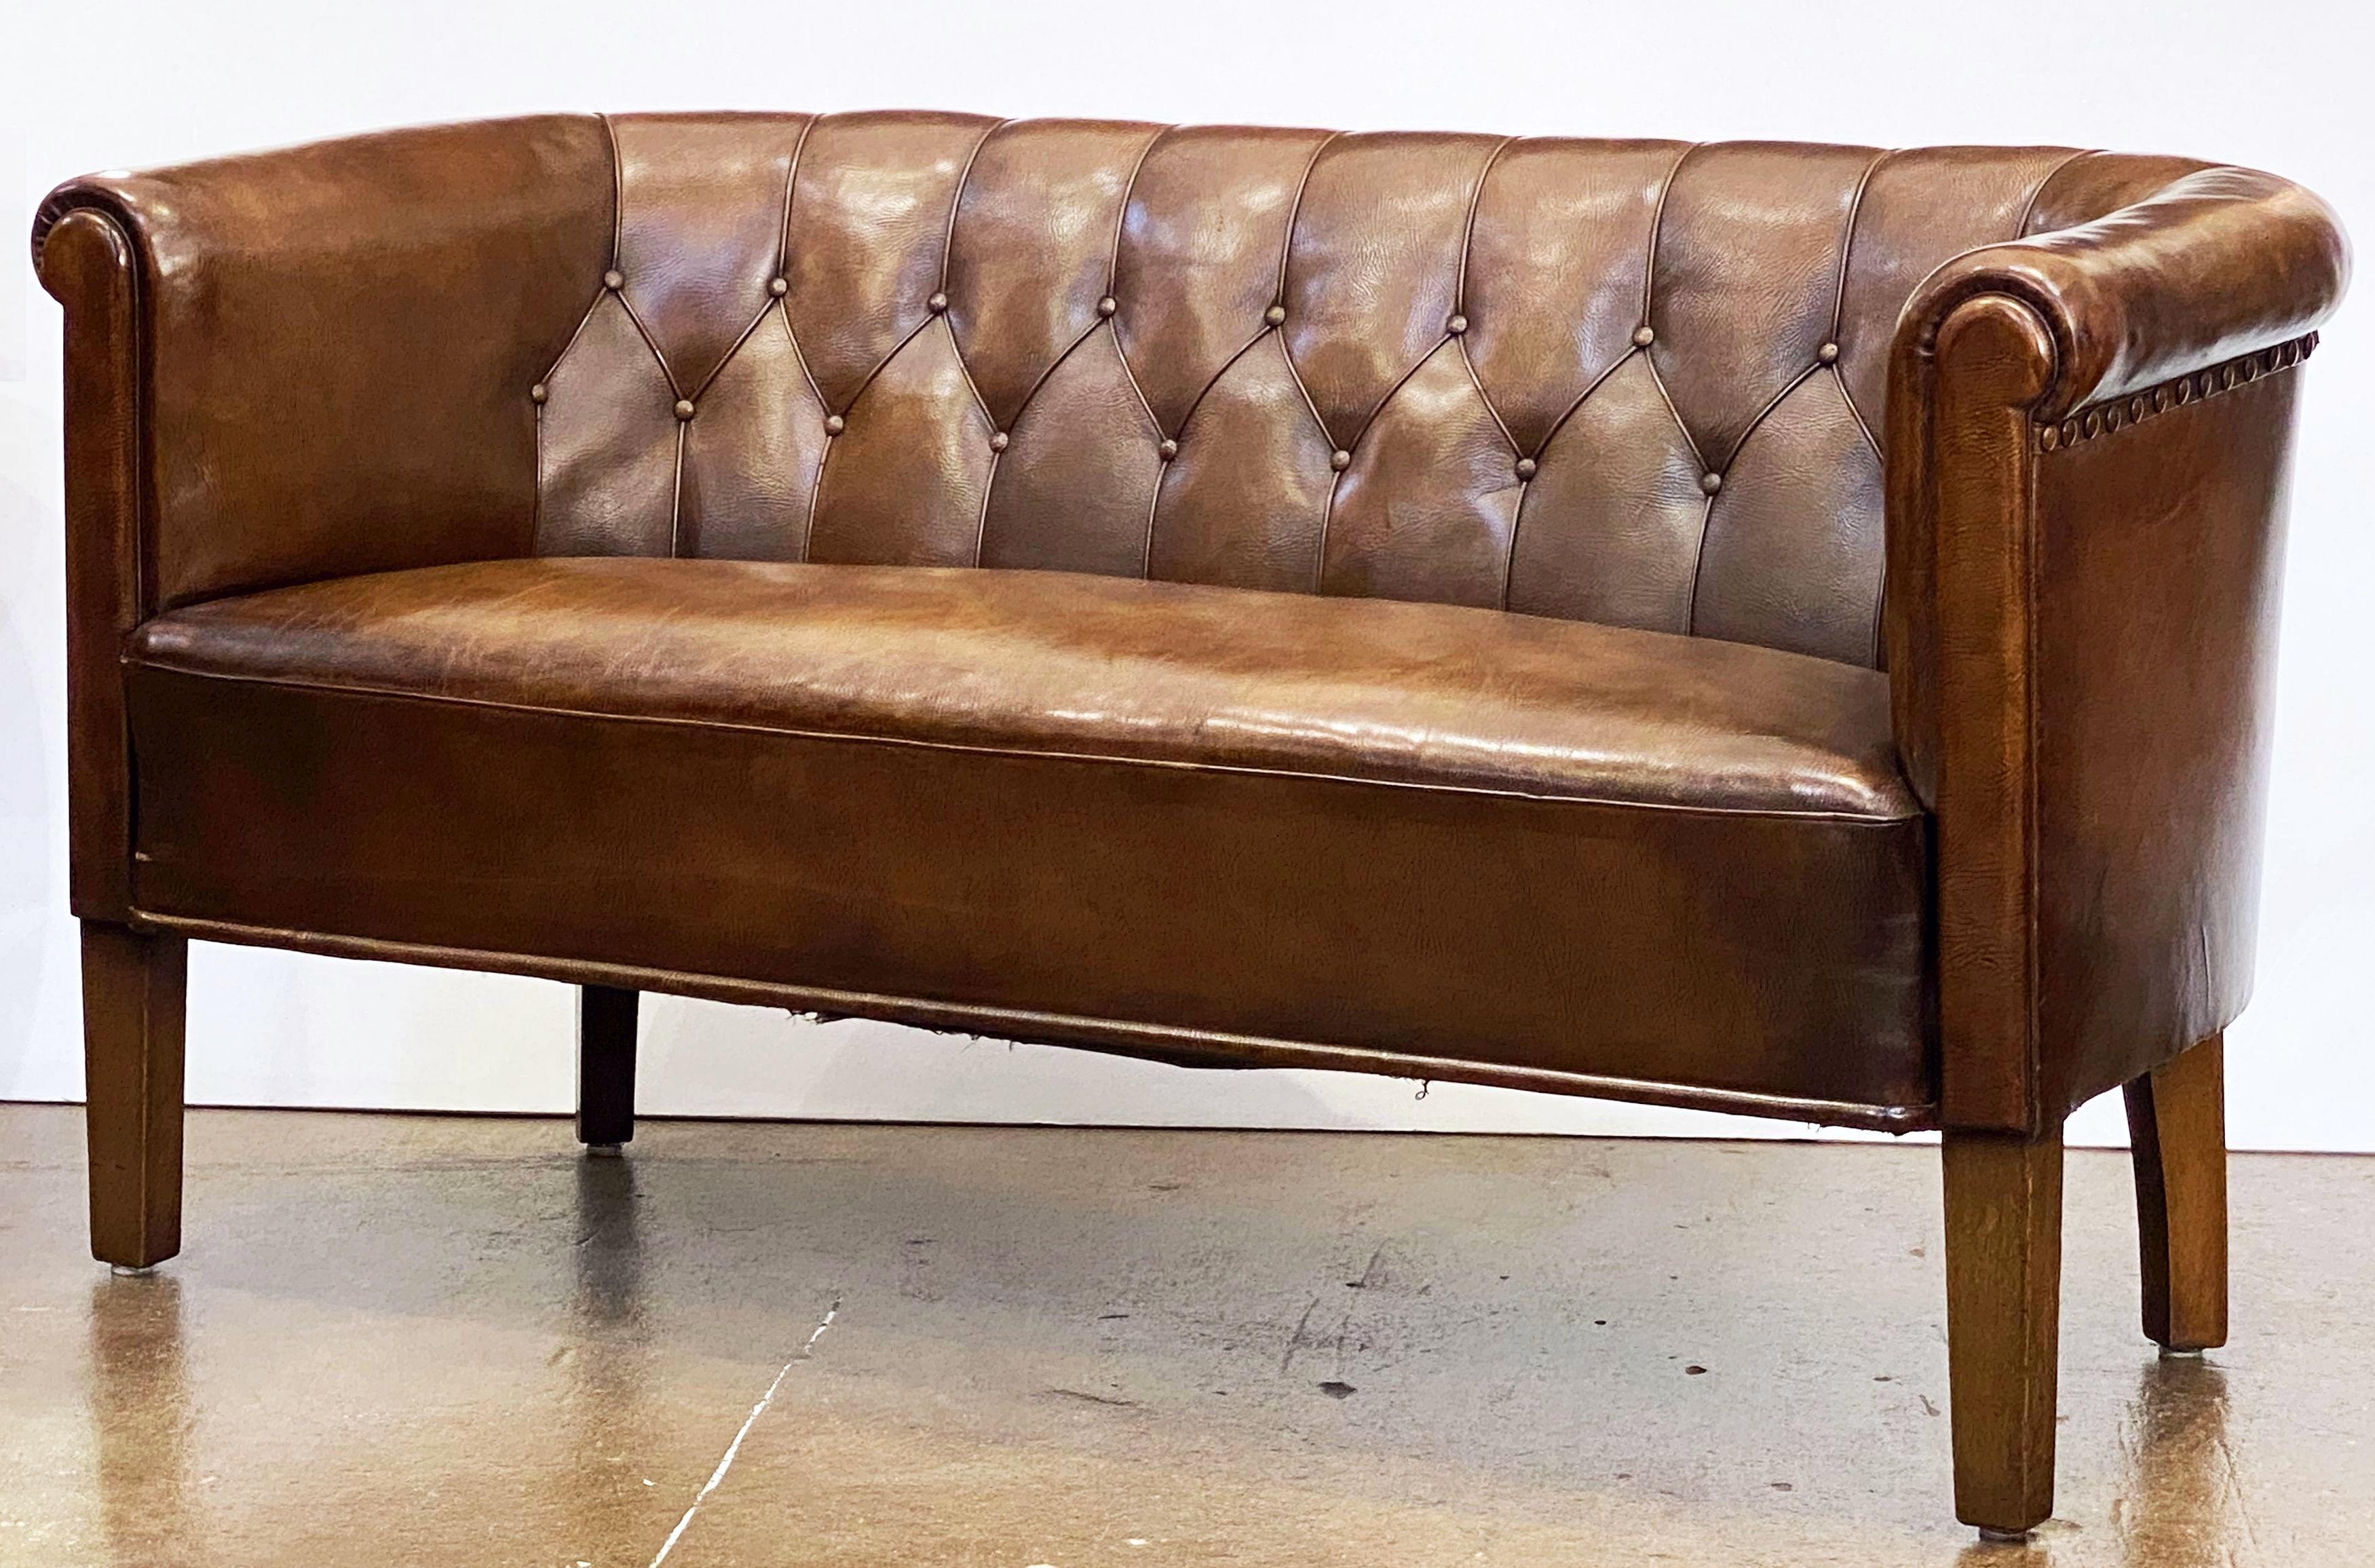 A fine Swedish leather sofa or settee from the Mid-Century Modern era, featuring a tufted back and stylish arms, with a comfortable seat resting on four shaped legs, and decorative nail-head trim accents around the backside.